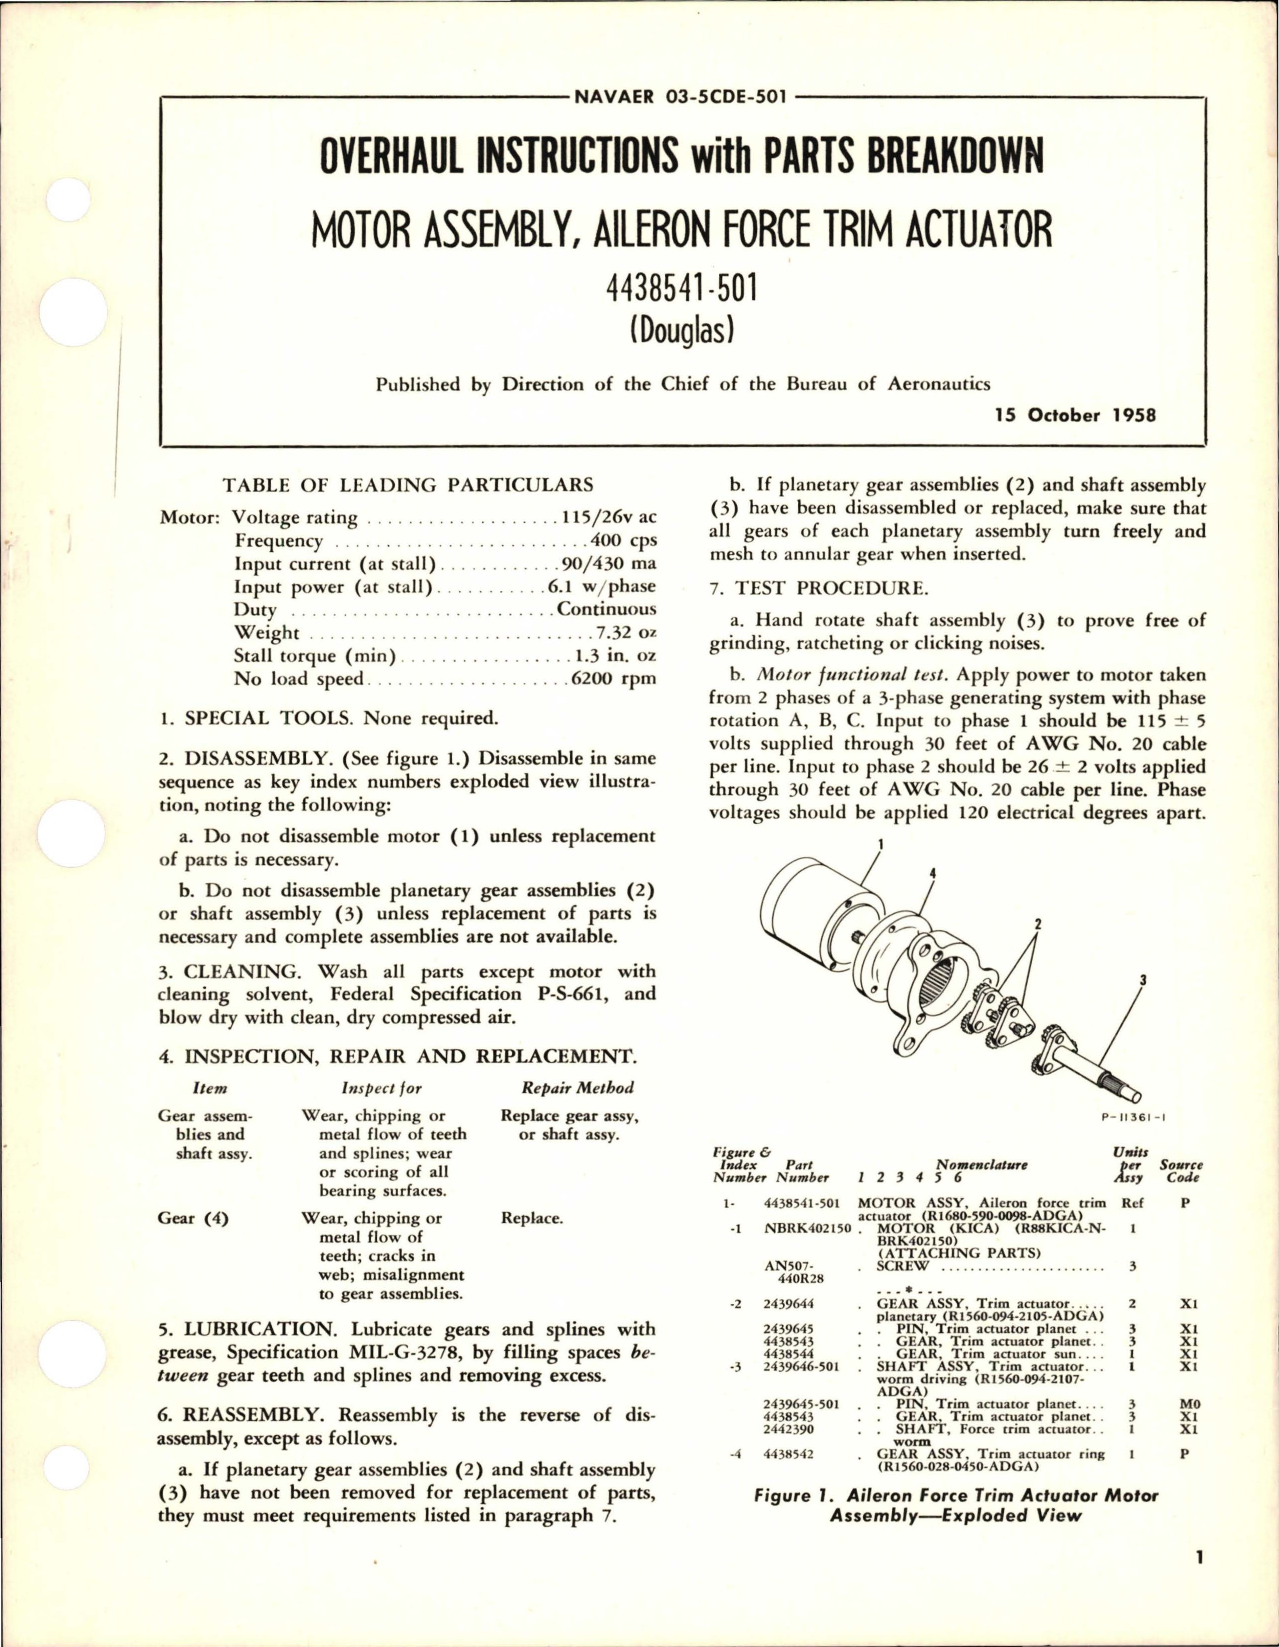 Sample page 1 from AirCorps Library document: Overhaul Instructions with Parts Breakdown for Aileron Force Trim Actuator Motor Assembly - 4438541-501